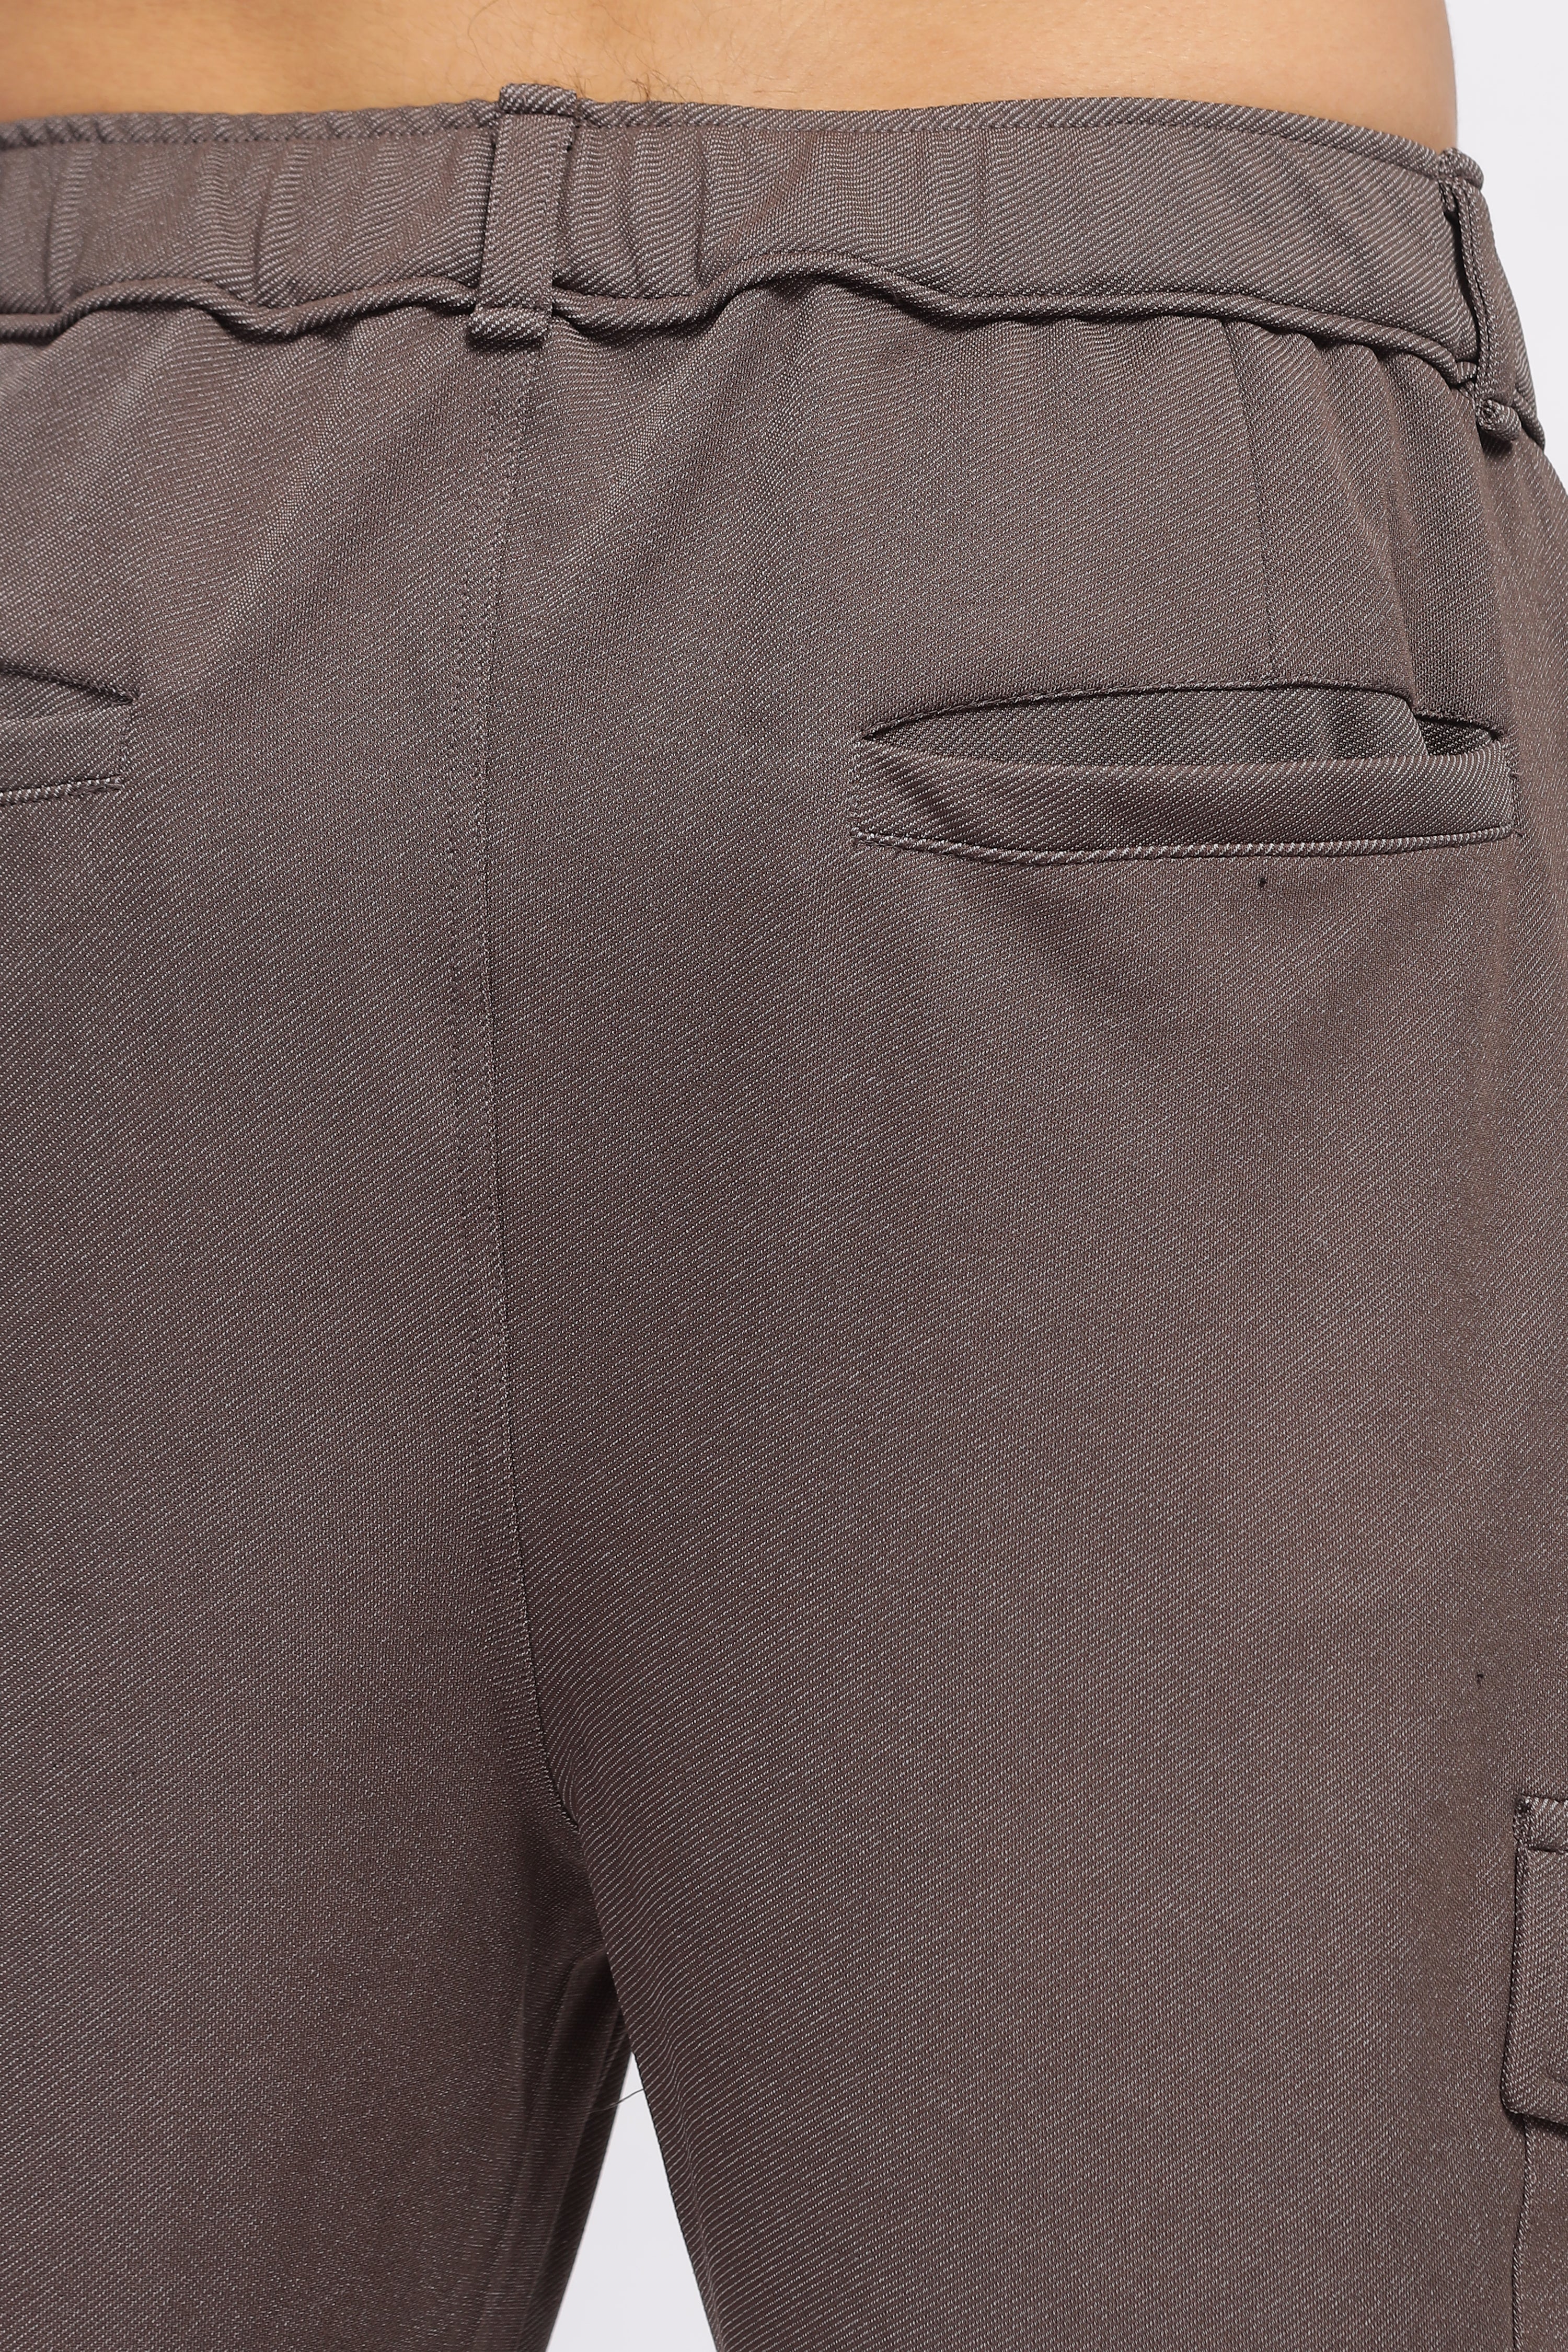 Brown Cargo Style Track Pants